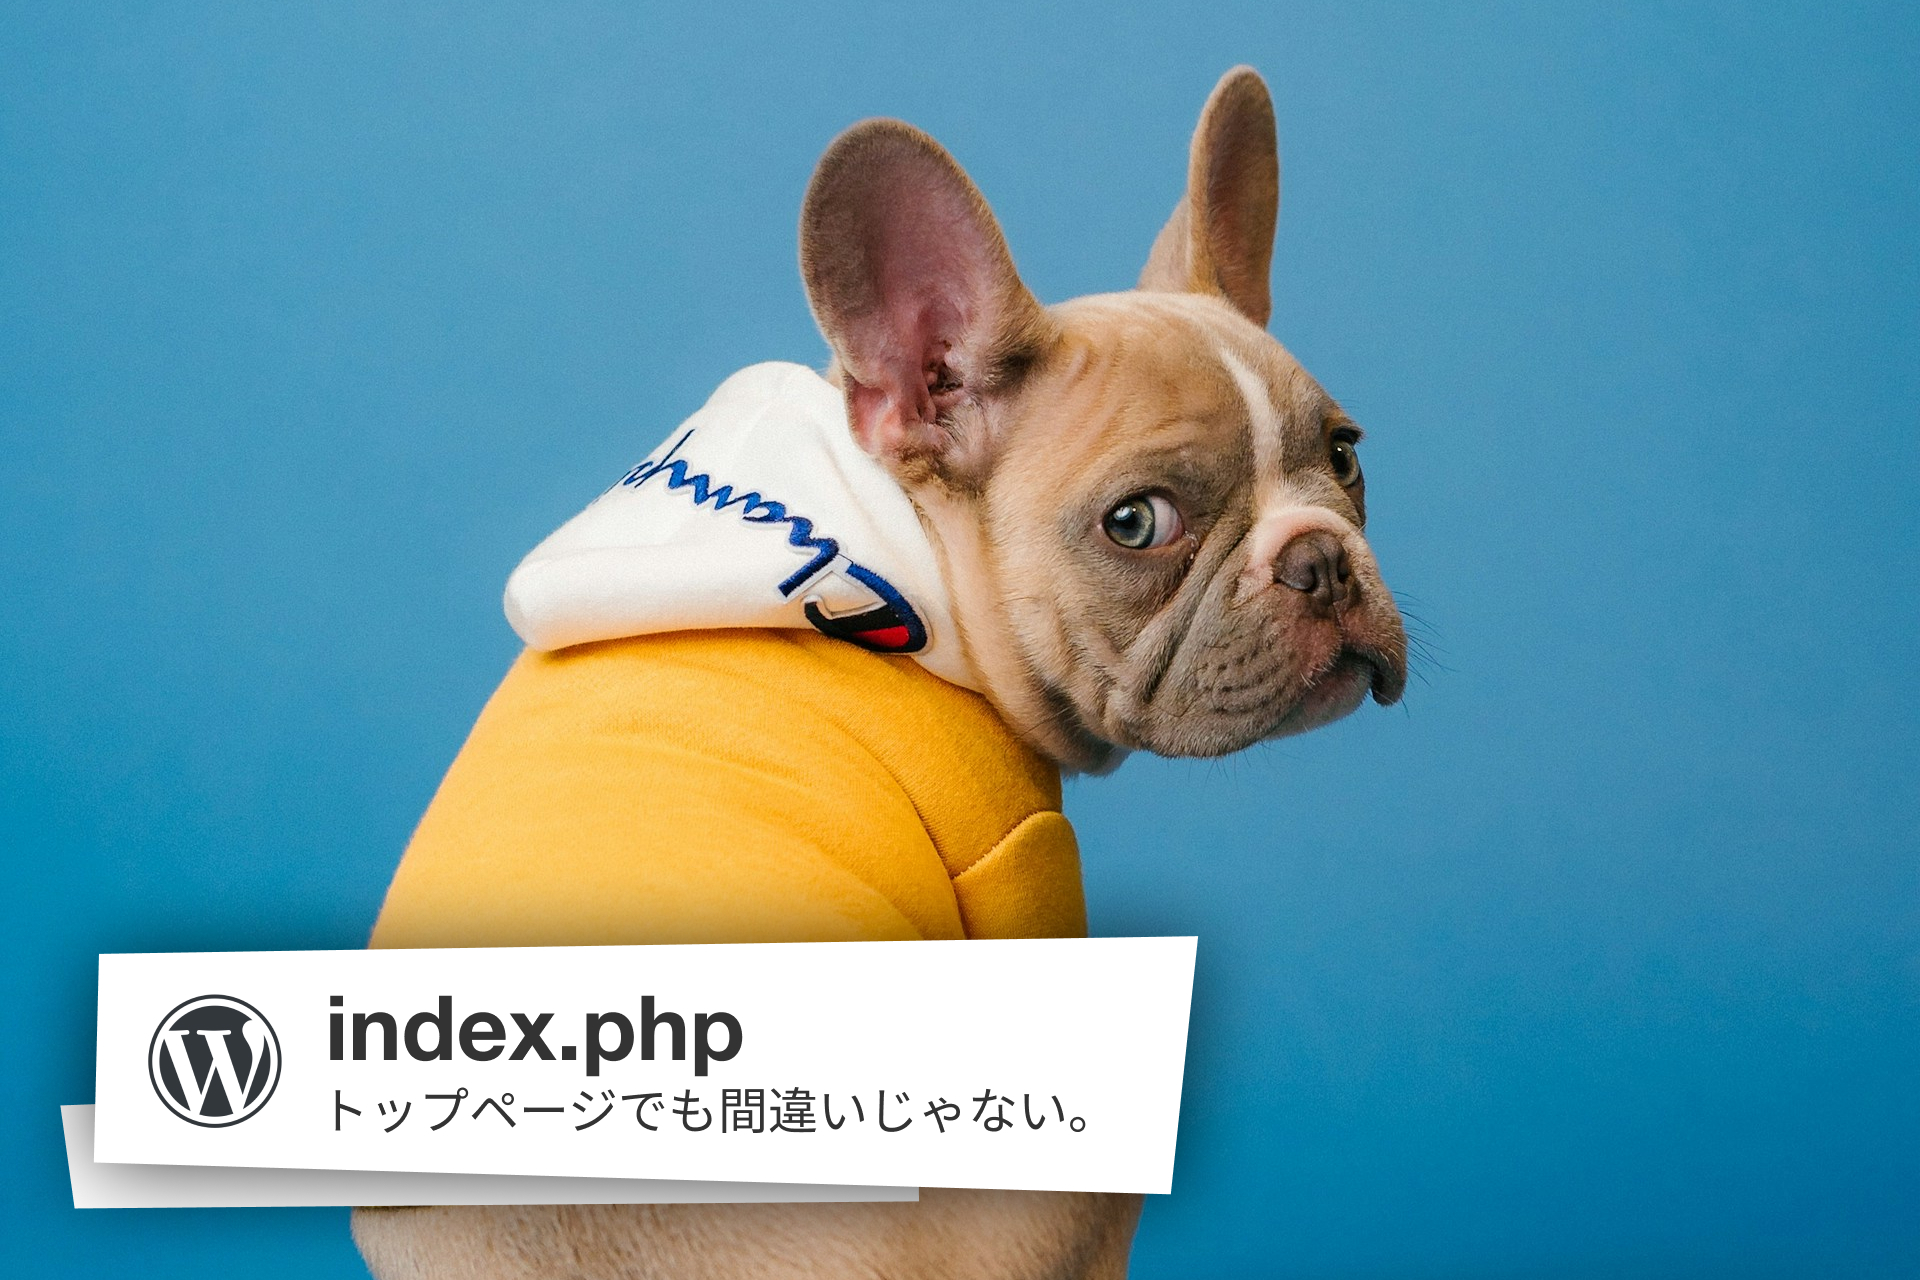 front-page.phpやhome.phpが表示されないとき。